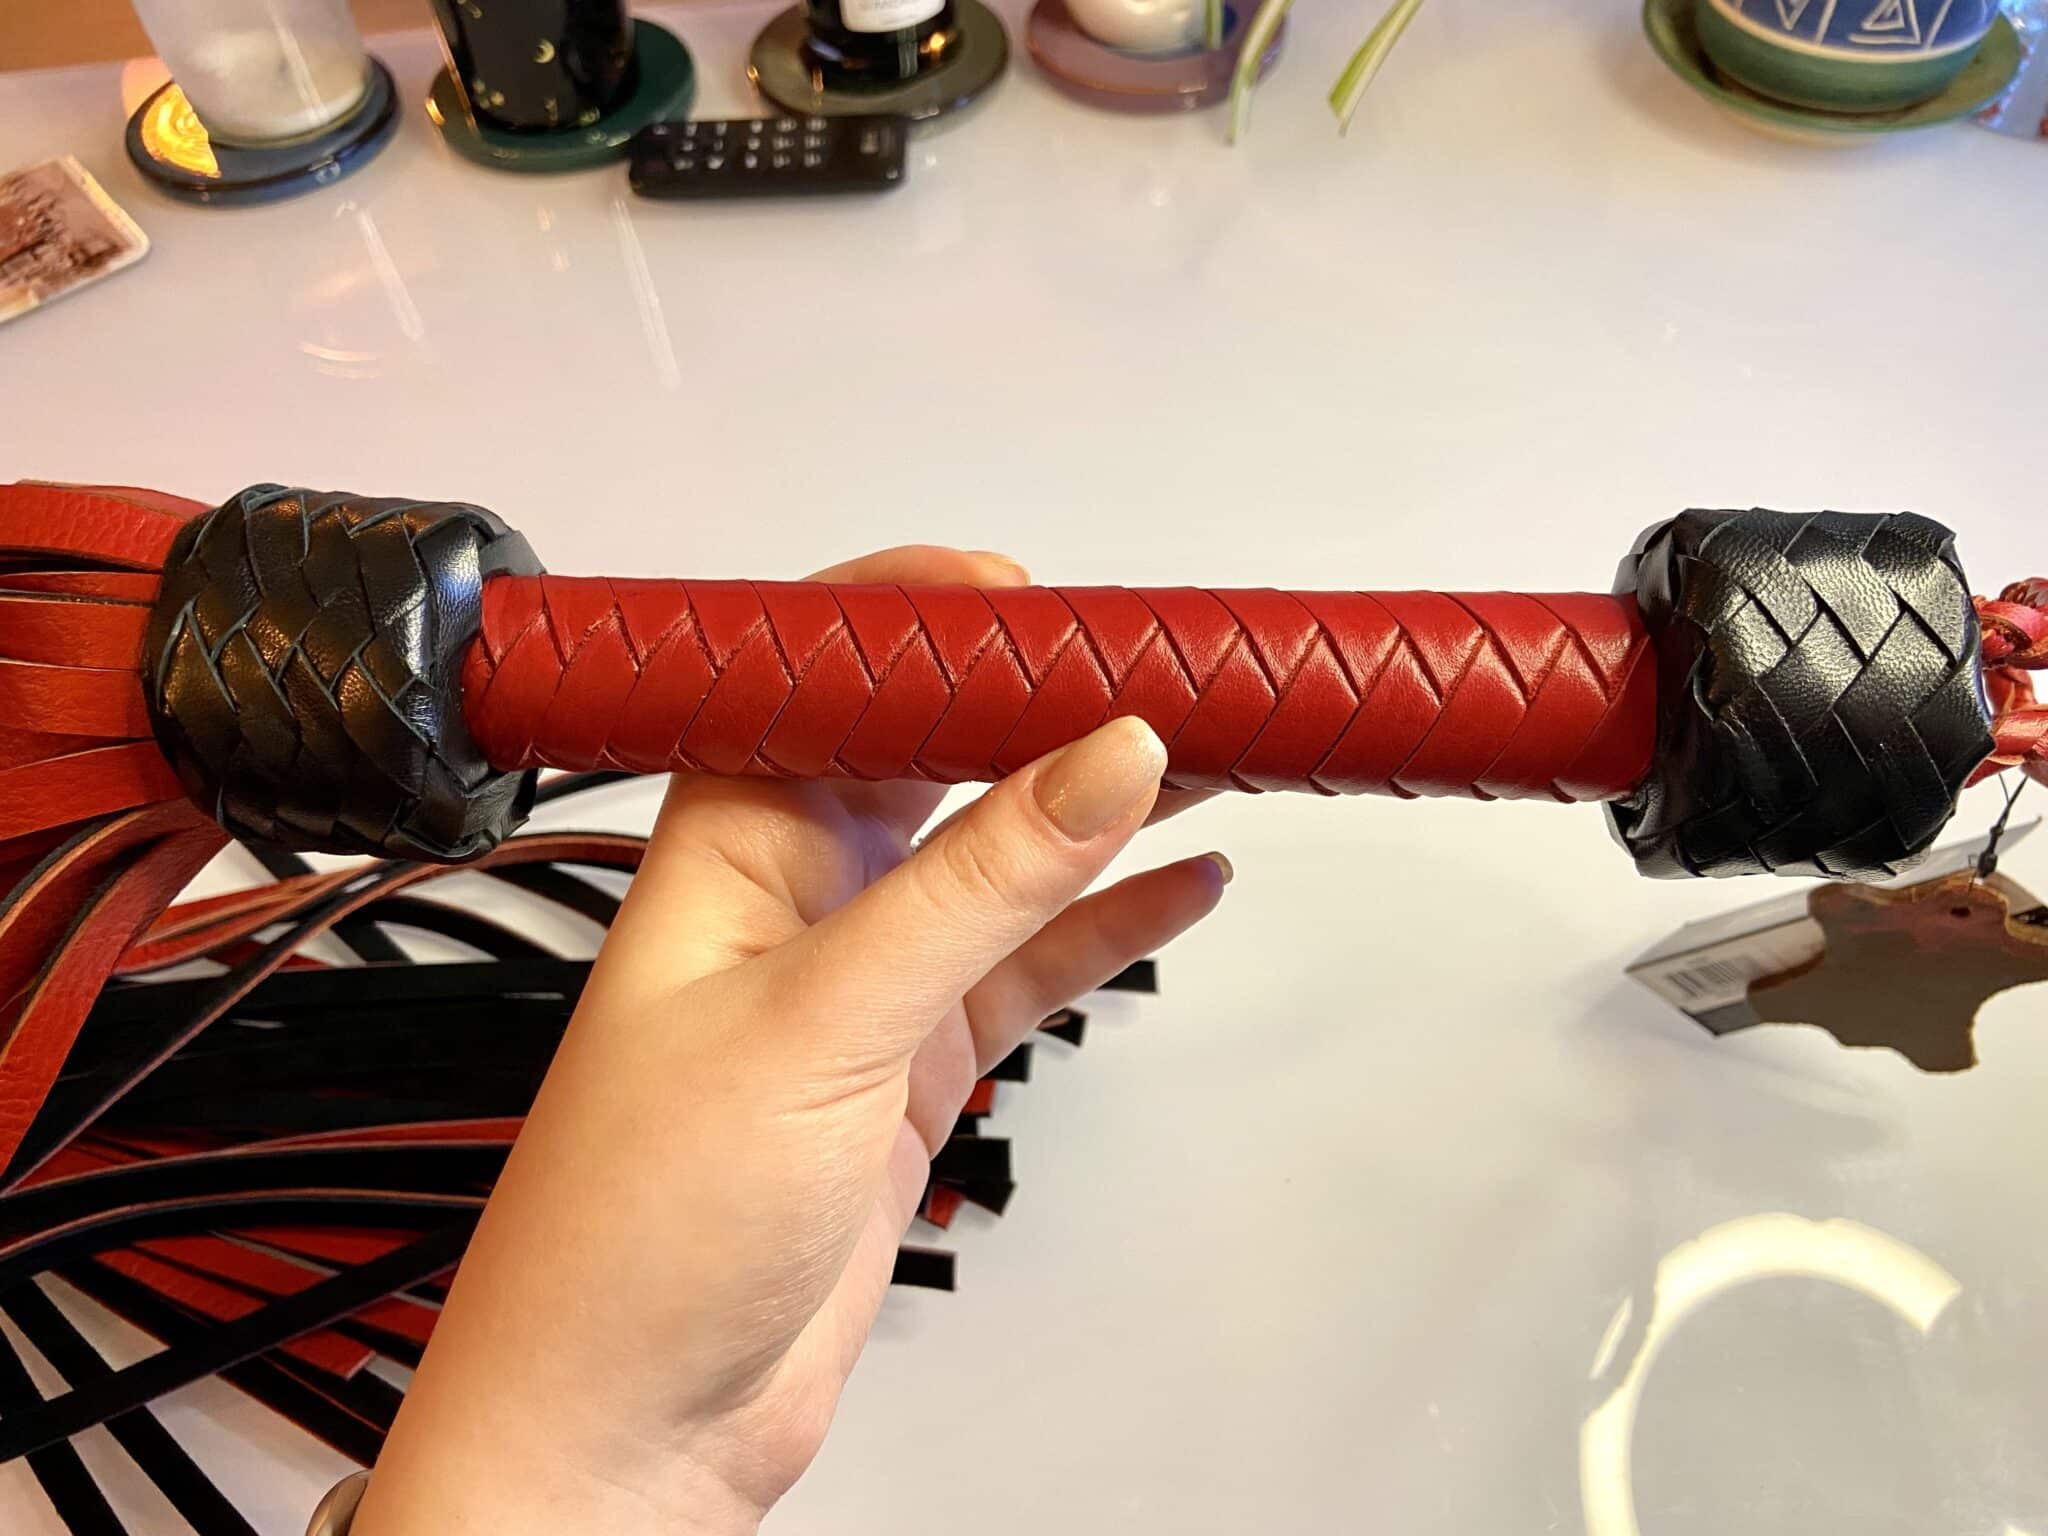 Strict Leather Flogger The Strict Leather Flogger: My Take on Ease of Use